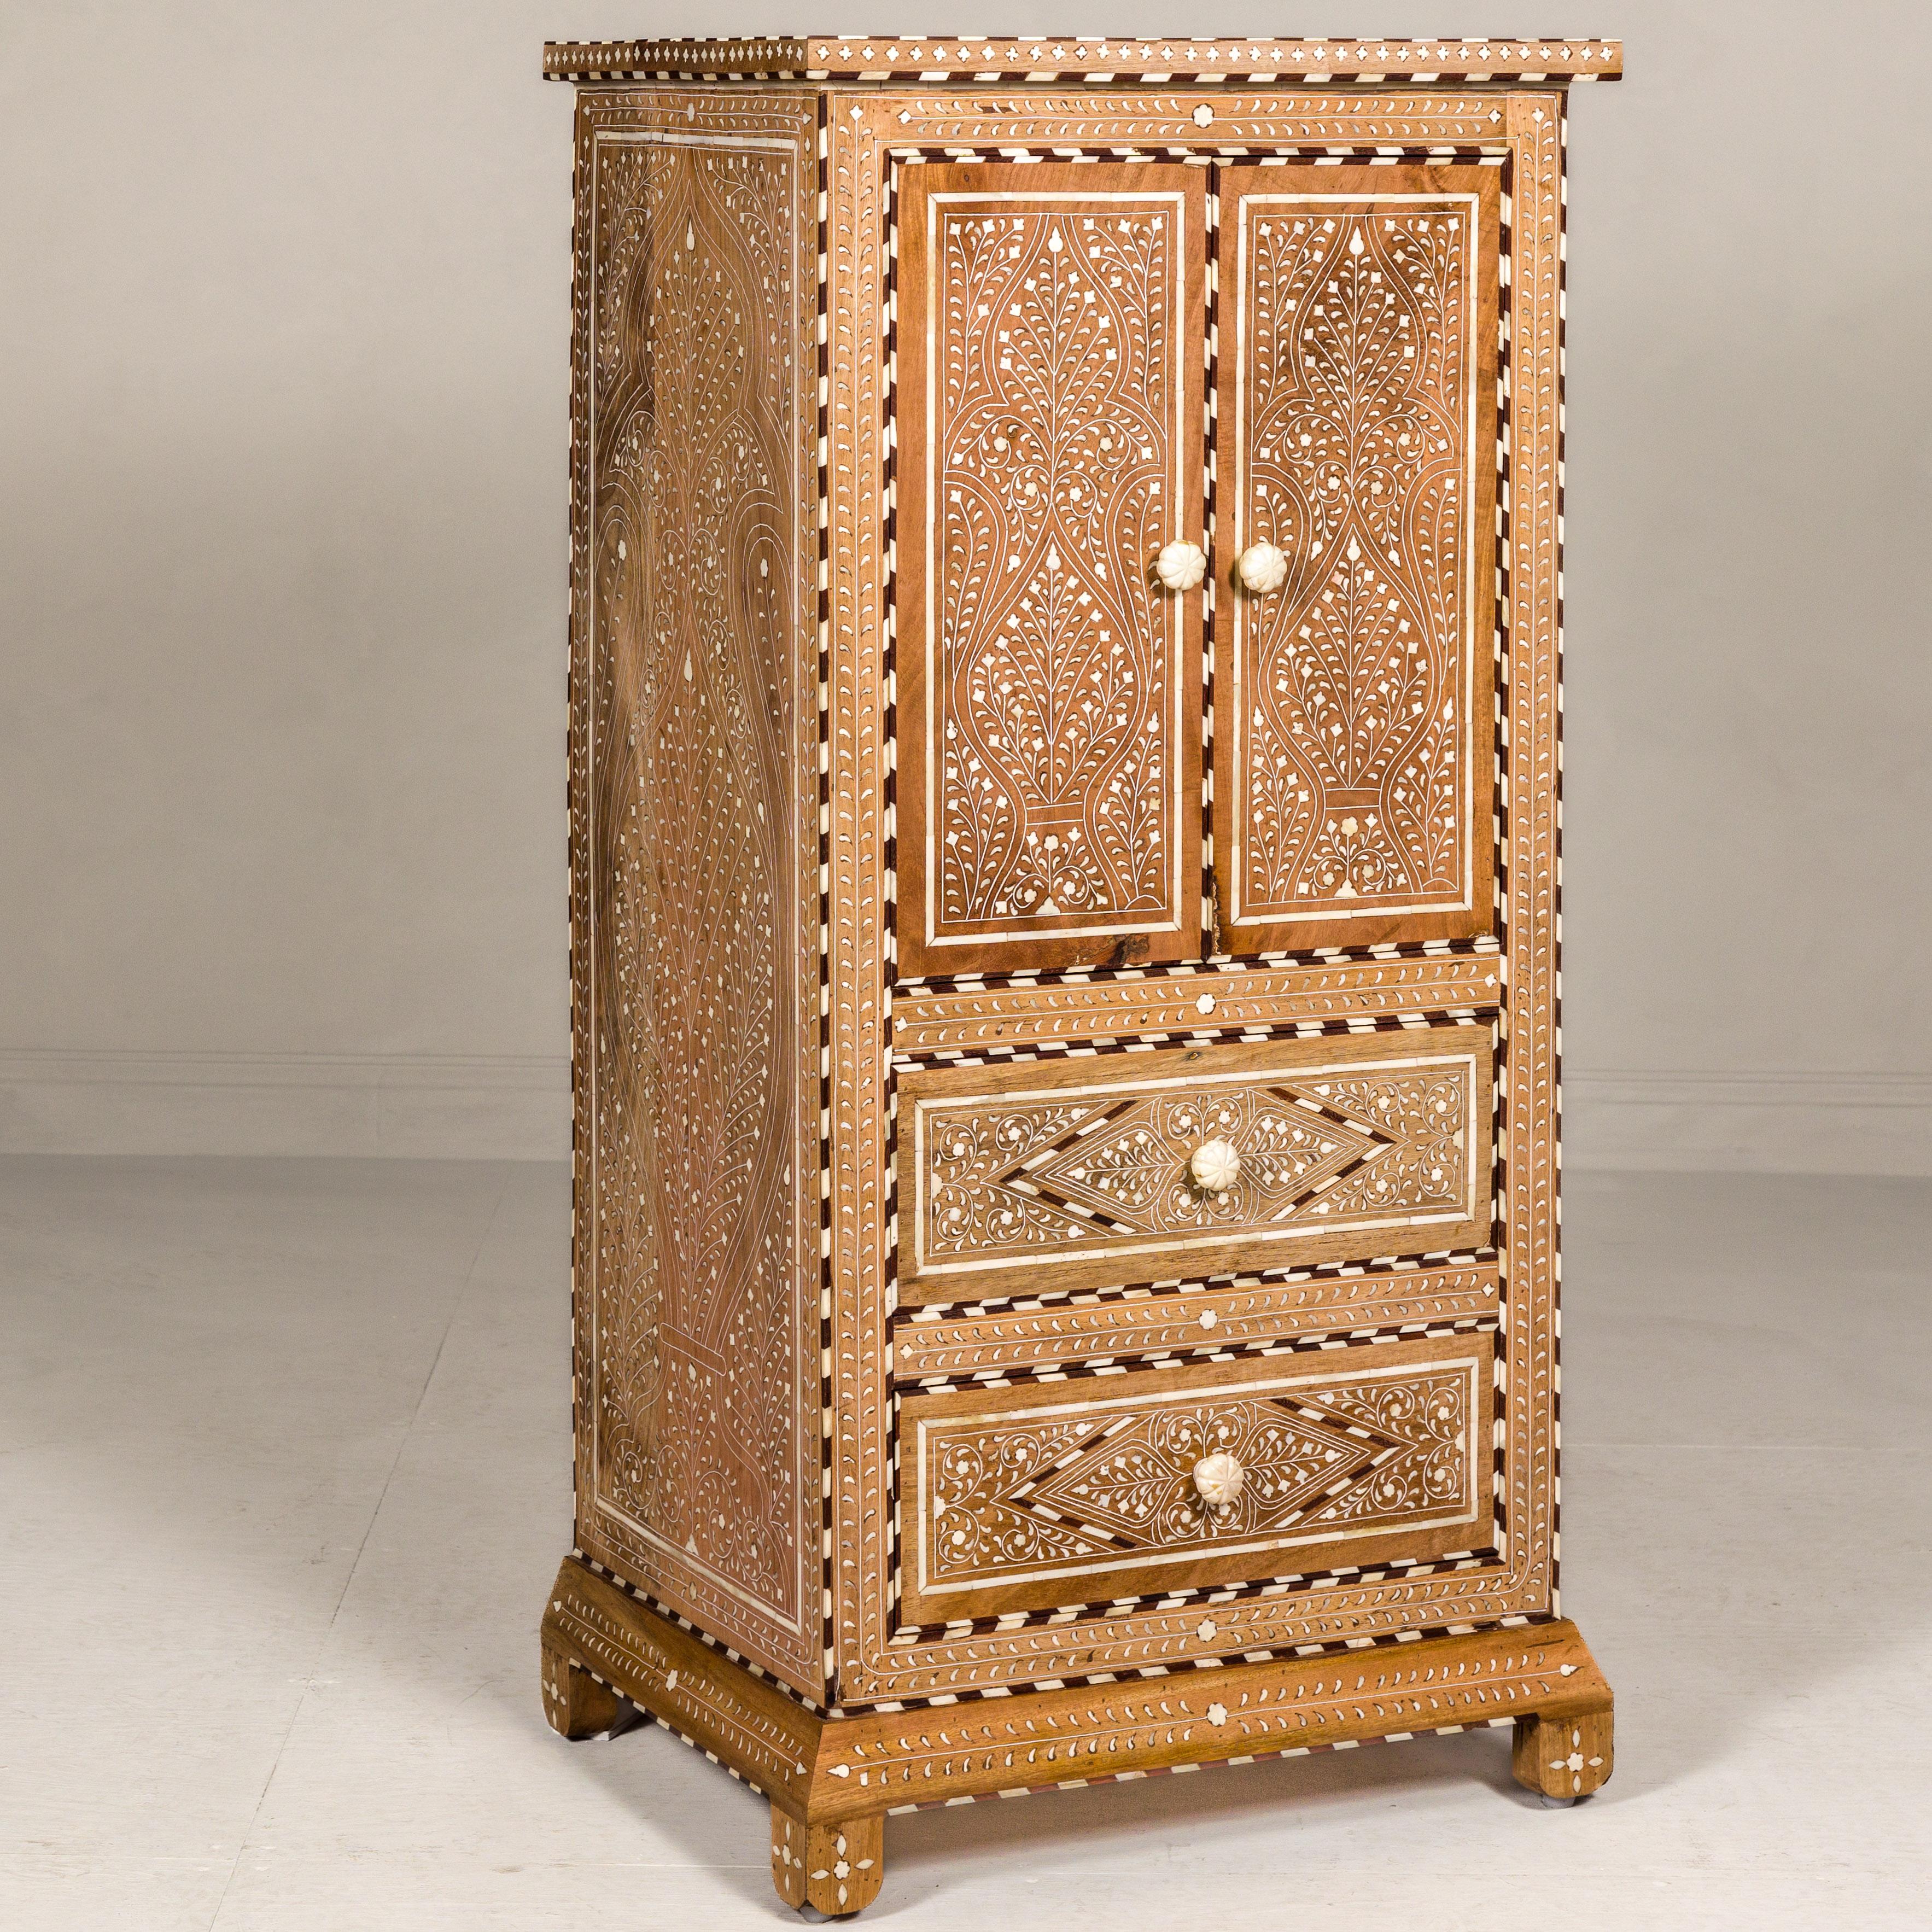 Anglo Indian Style Narrow Cabinet with Foliage-Themed Bone Inlaid Décor For Sale 4